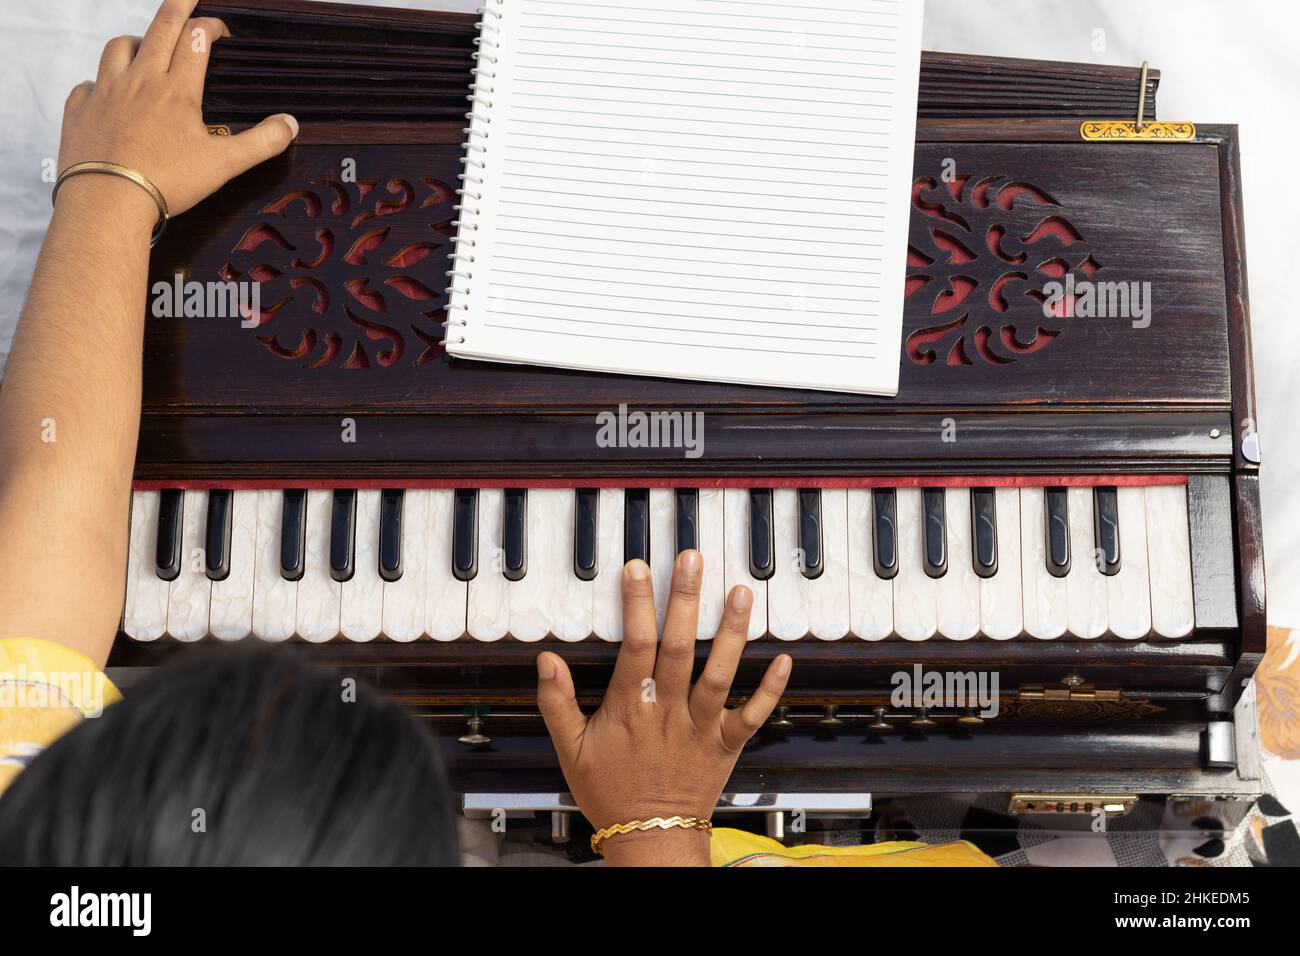 Top view of harmonium being played by hands of an Indian woman Stock Photo